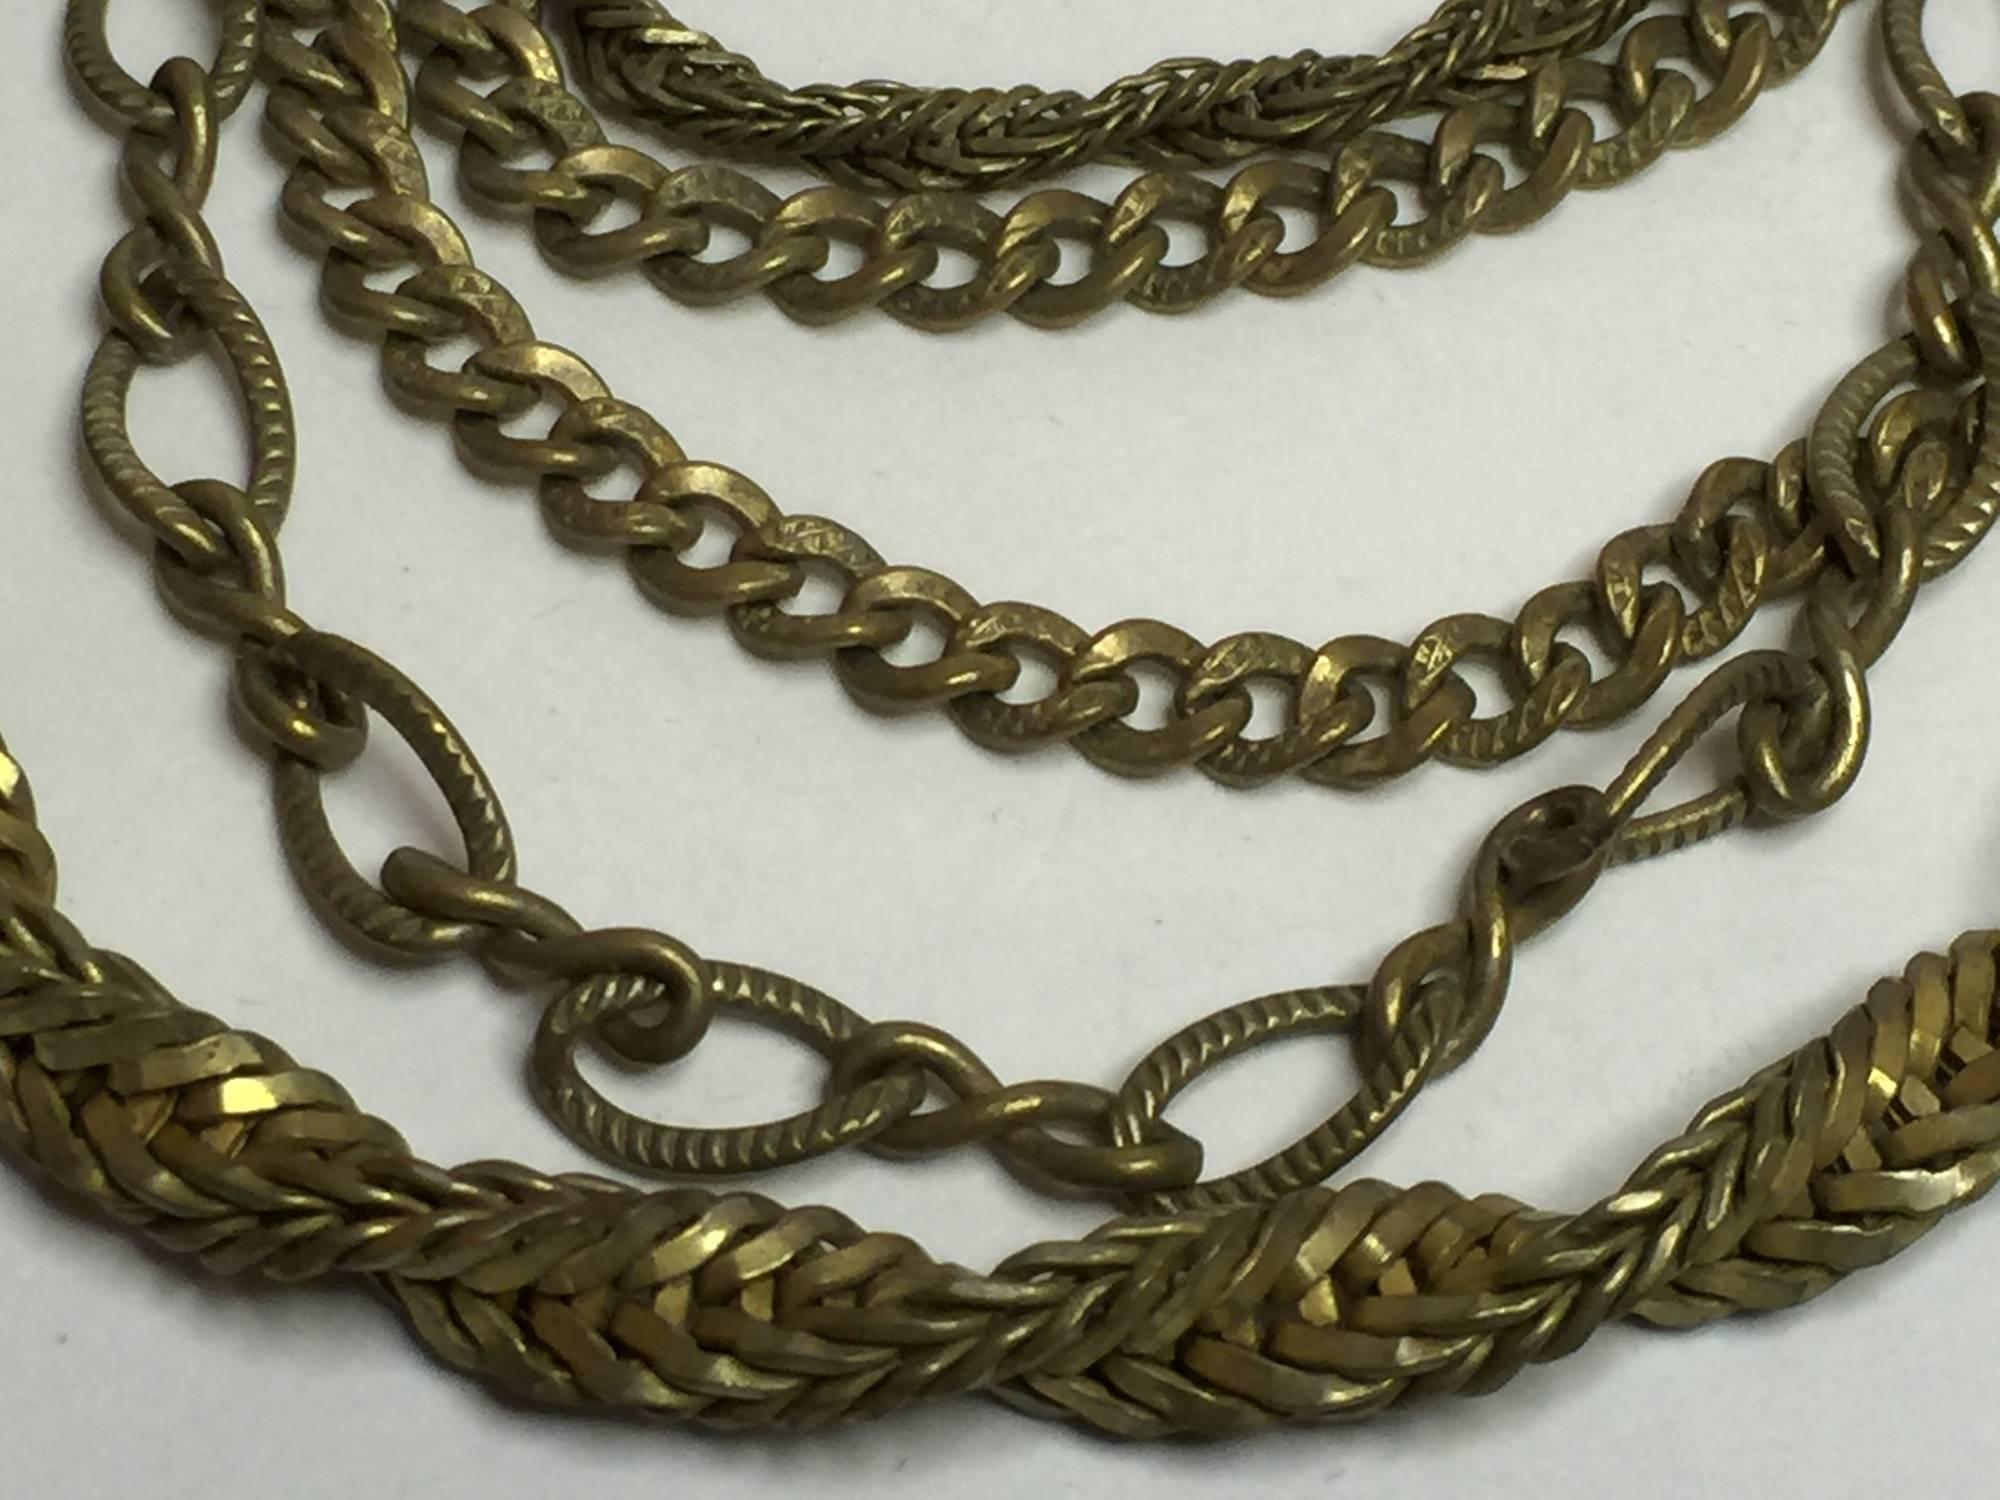 Although known for her intricate wired seed pearl and glass constructed items, Haskell also loved goldtone metal and chain. This multi chain necklace is highly textural in nature, and would twist beautifully with a string of Haskell pearls for a